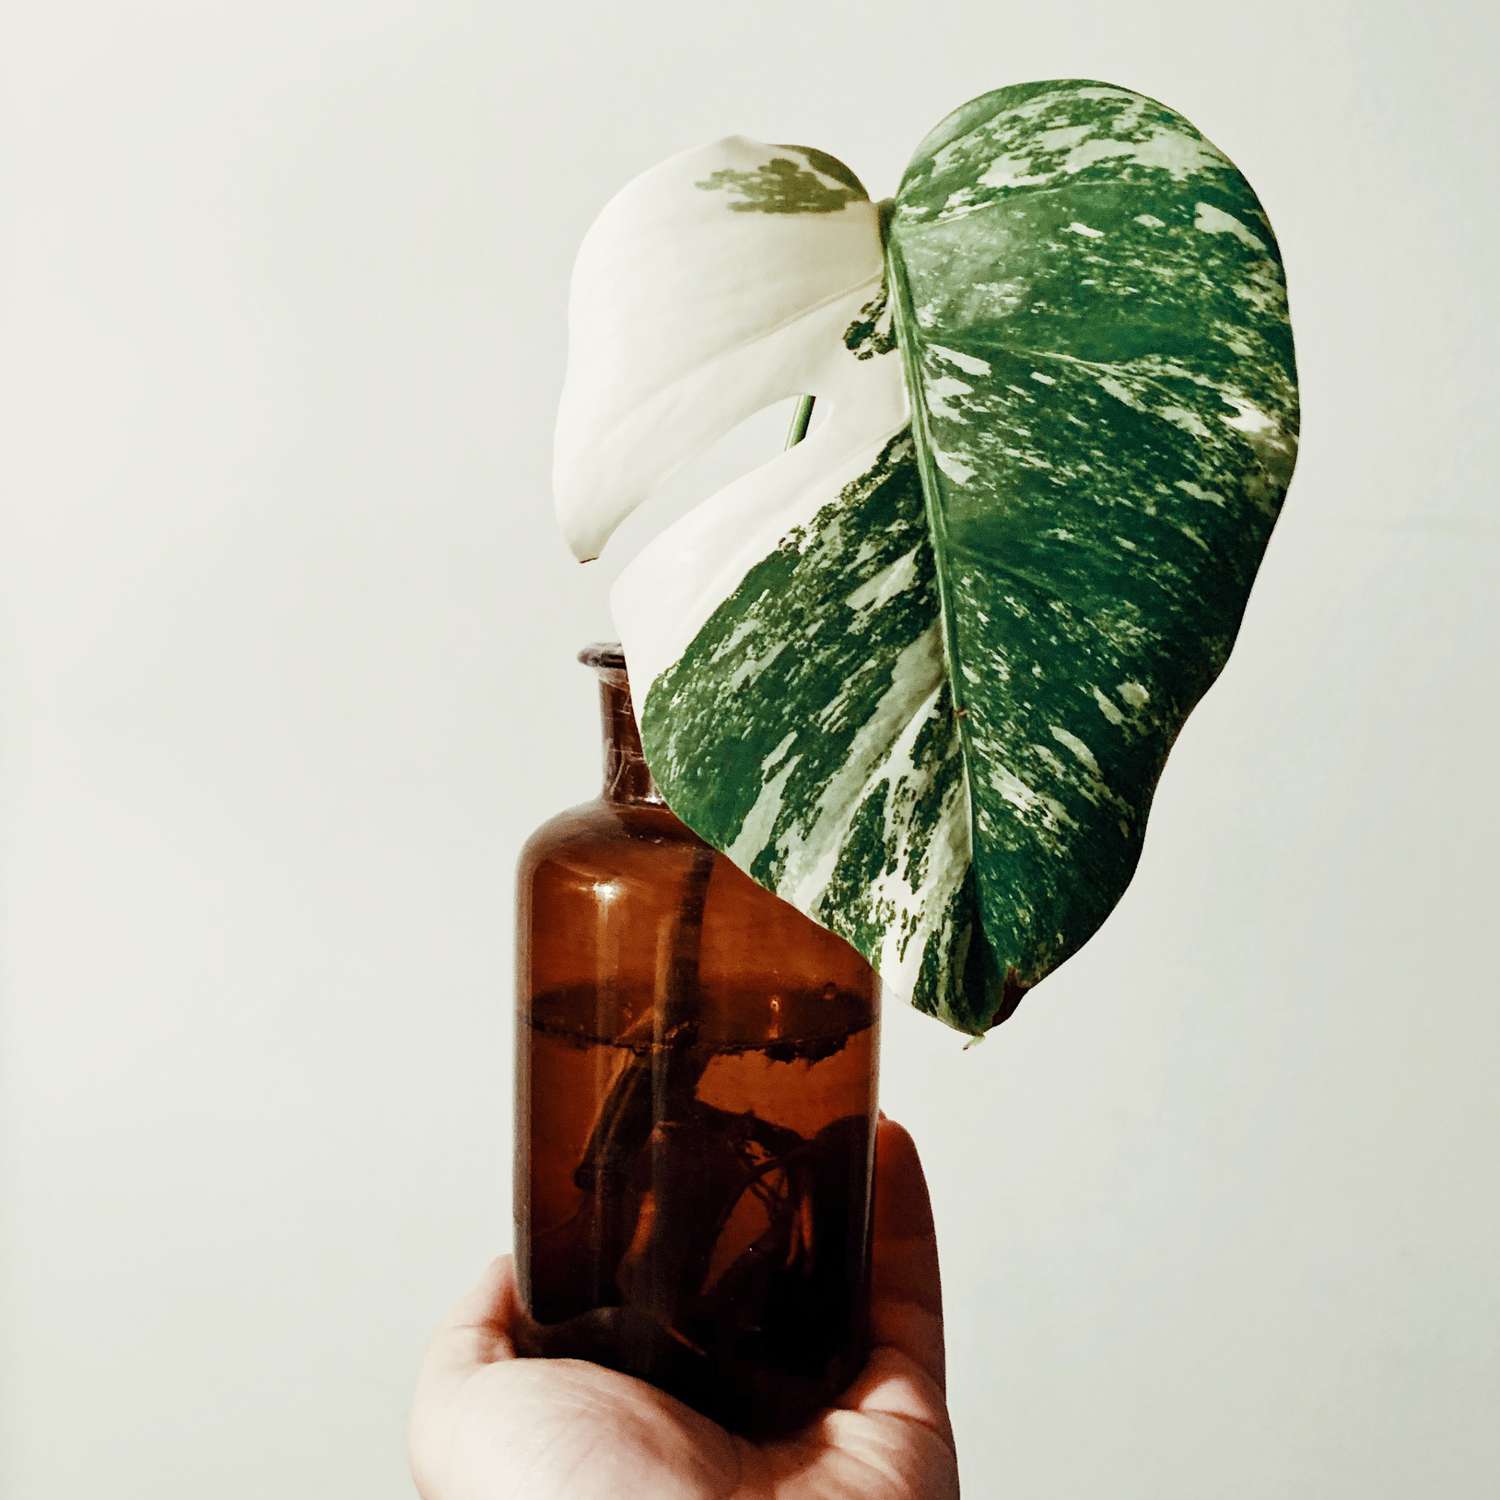 Variegated monstera 'albo' cutting in an amber glass jar.